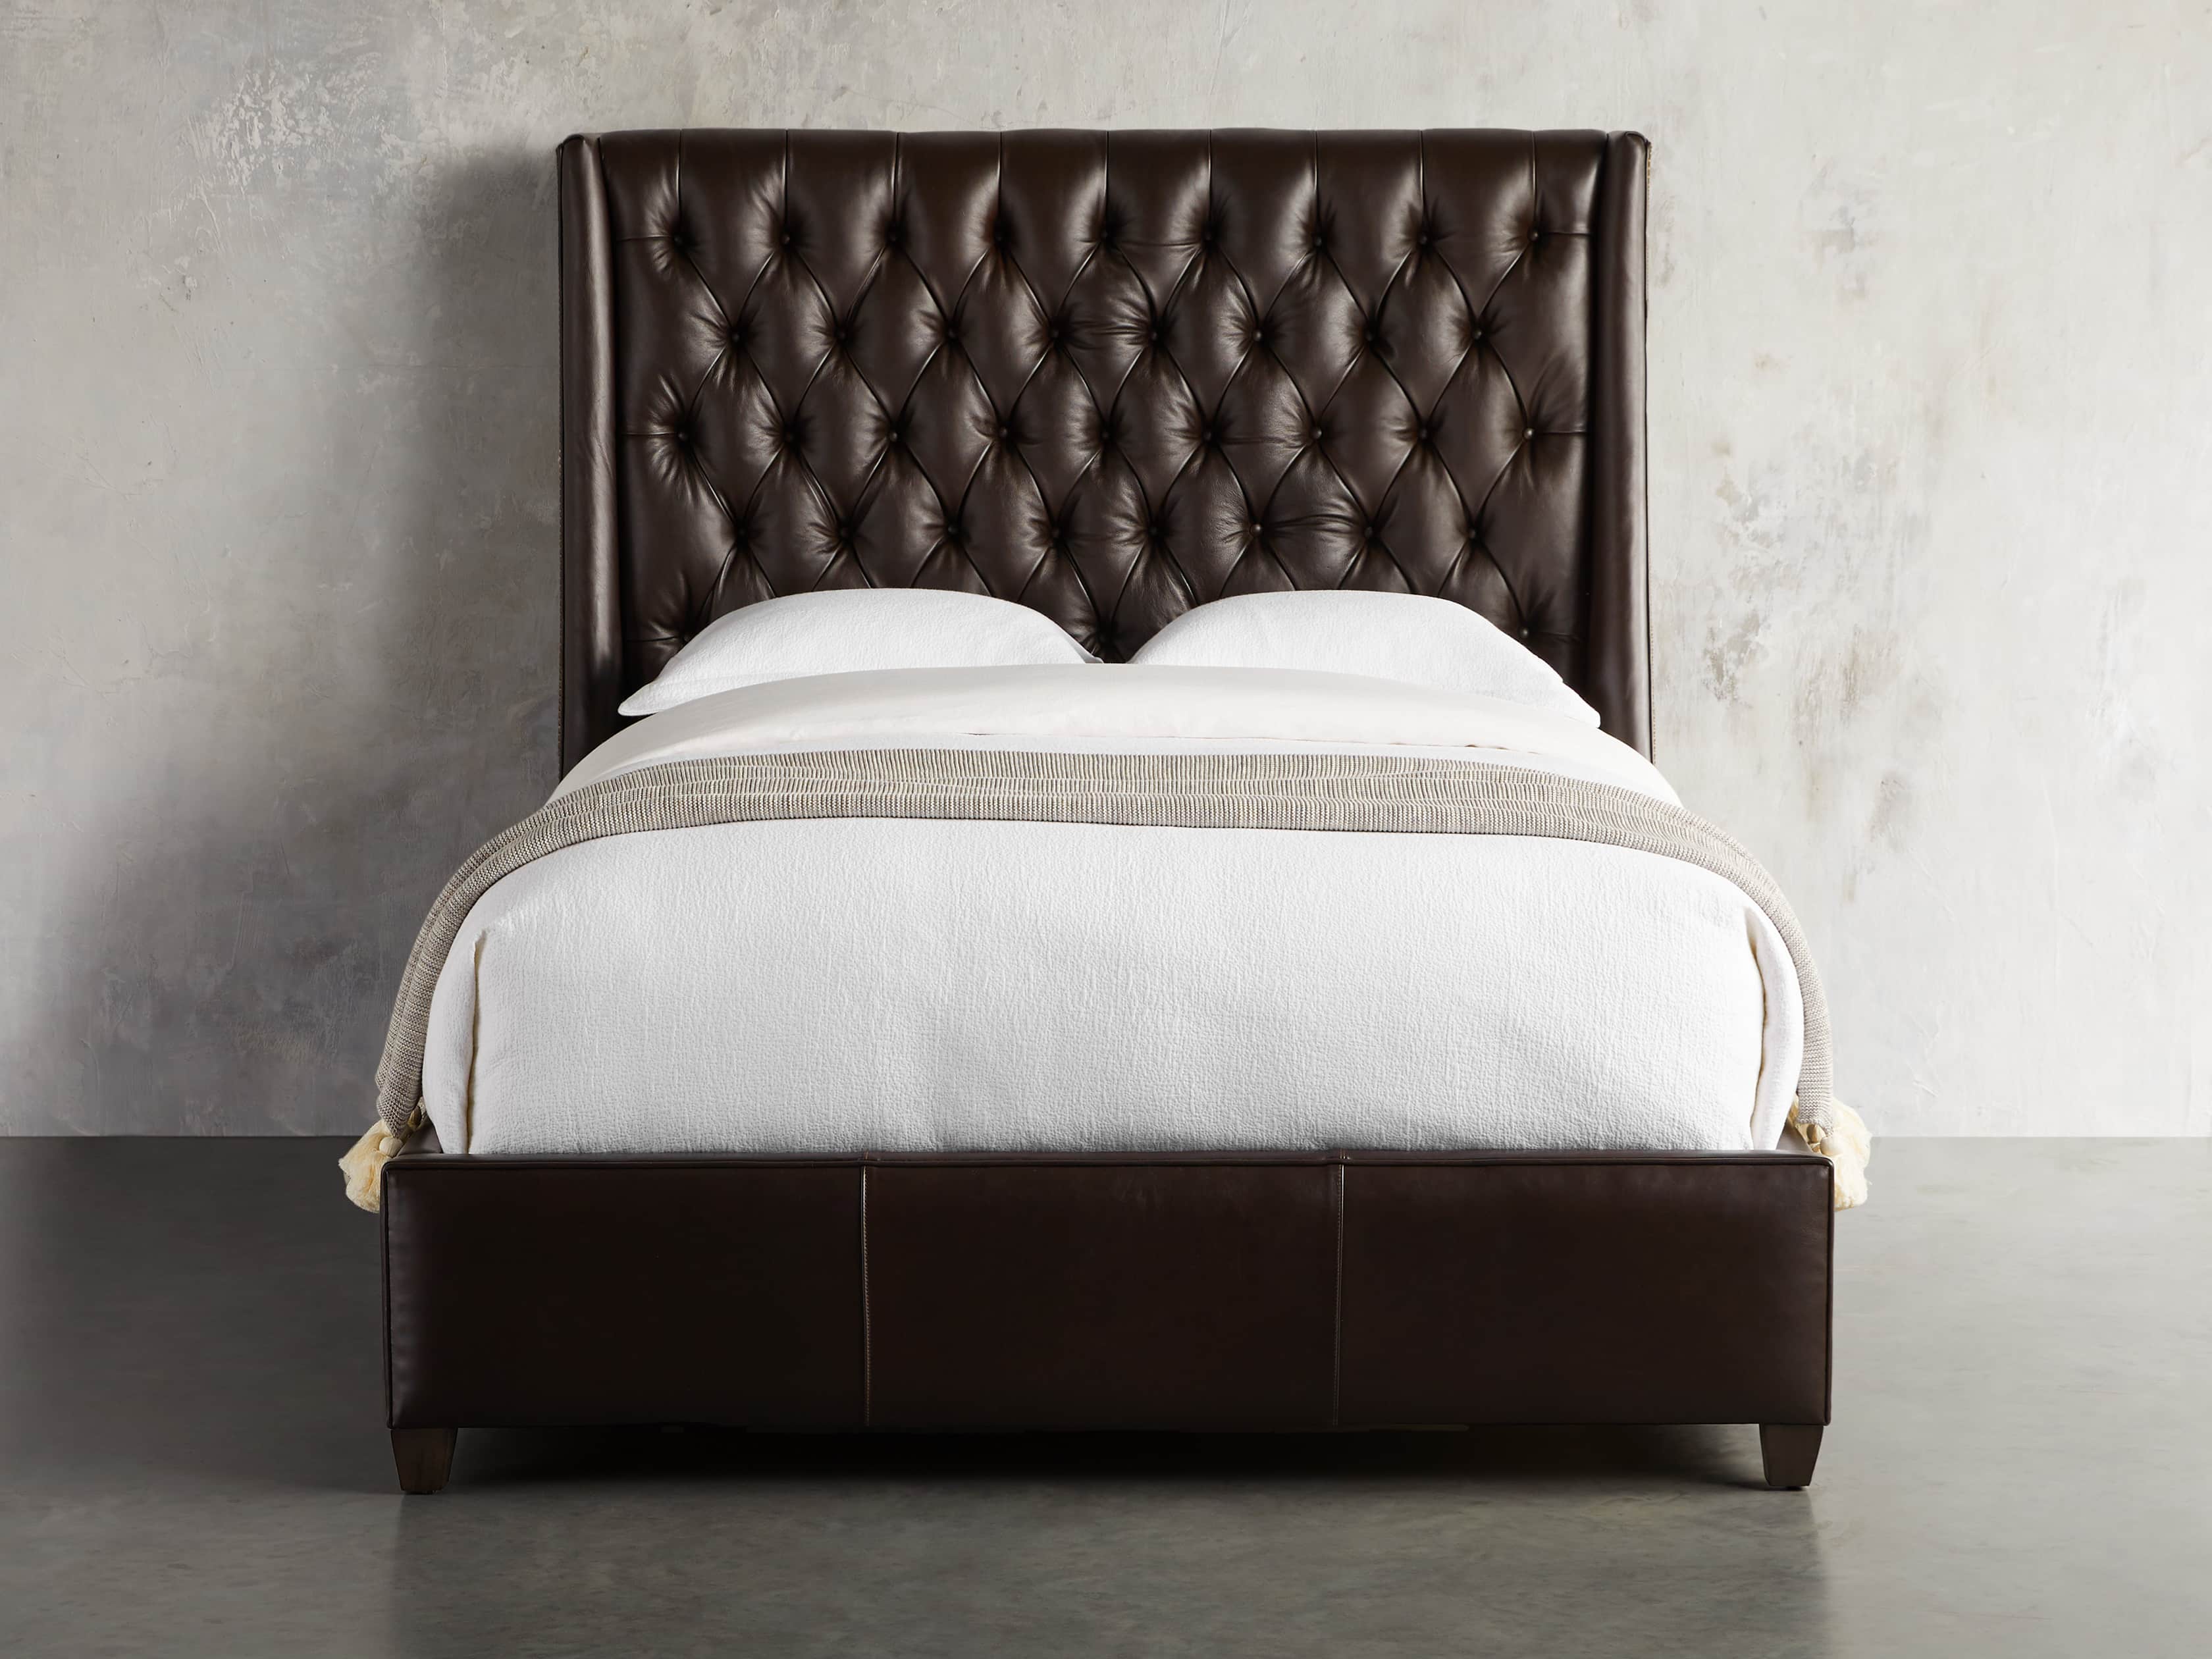 Devereaux Leather Tufted Bed Arhaus, White Leather Tufted Queen Bed